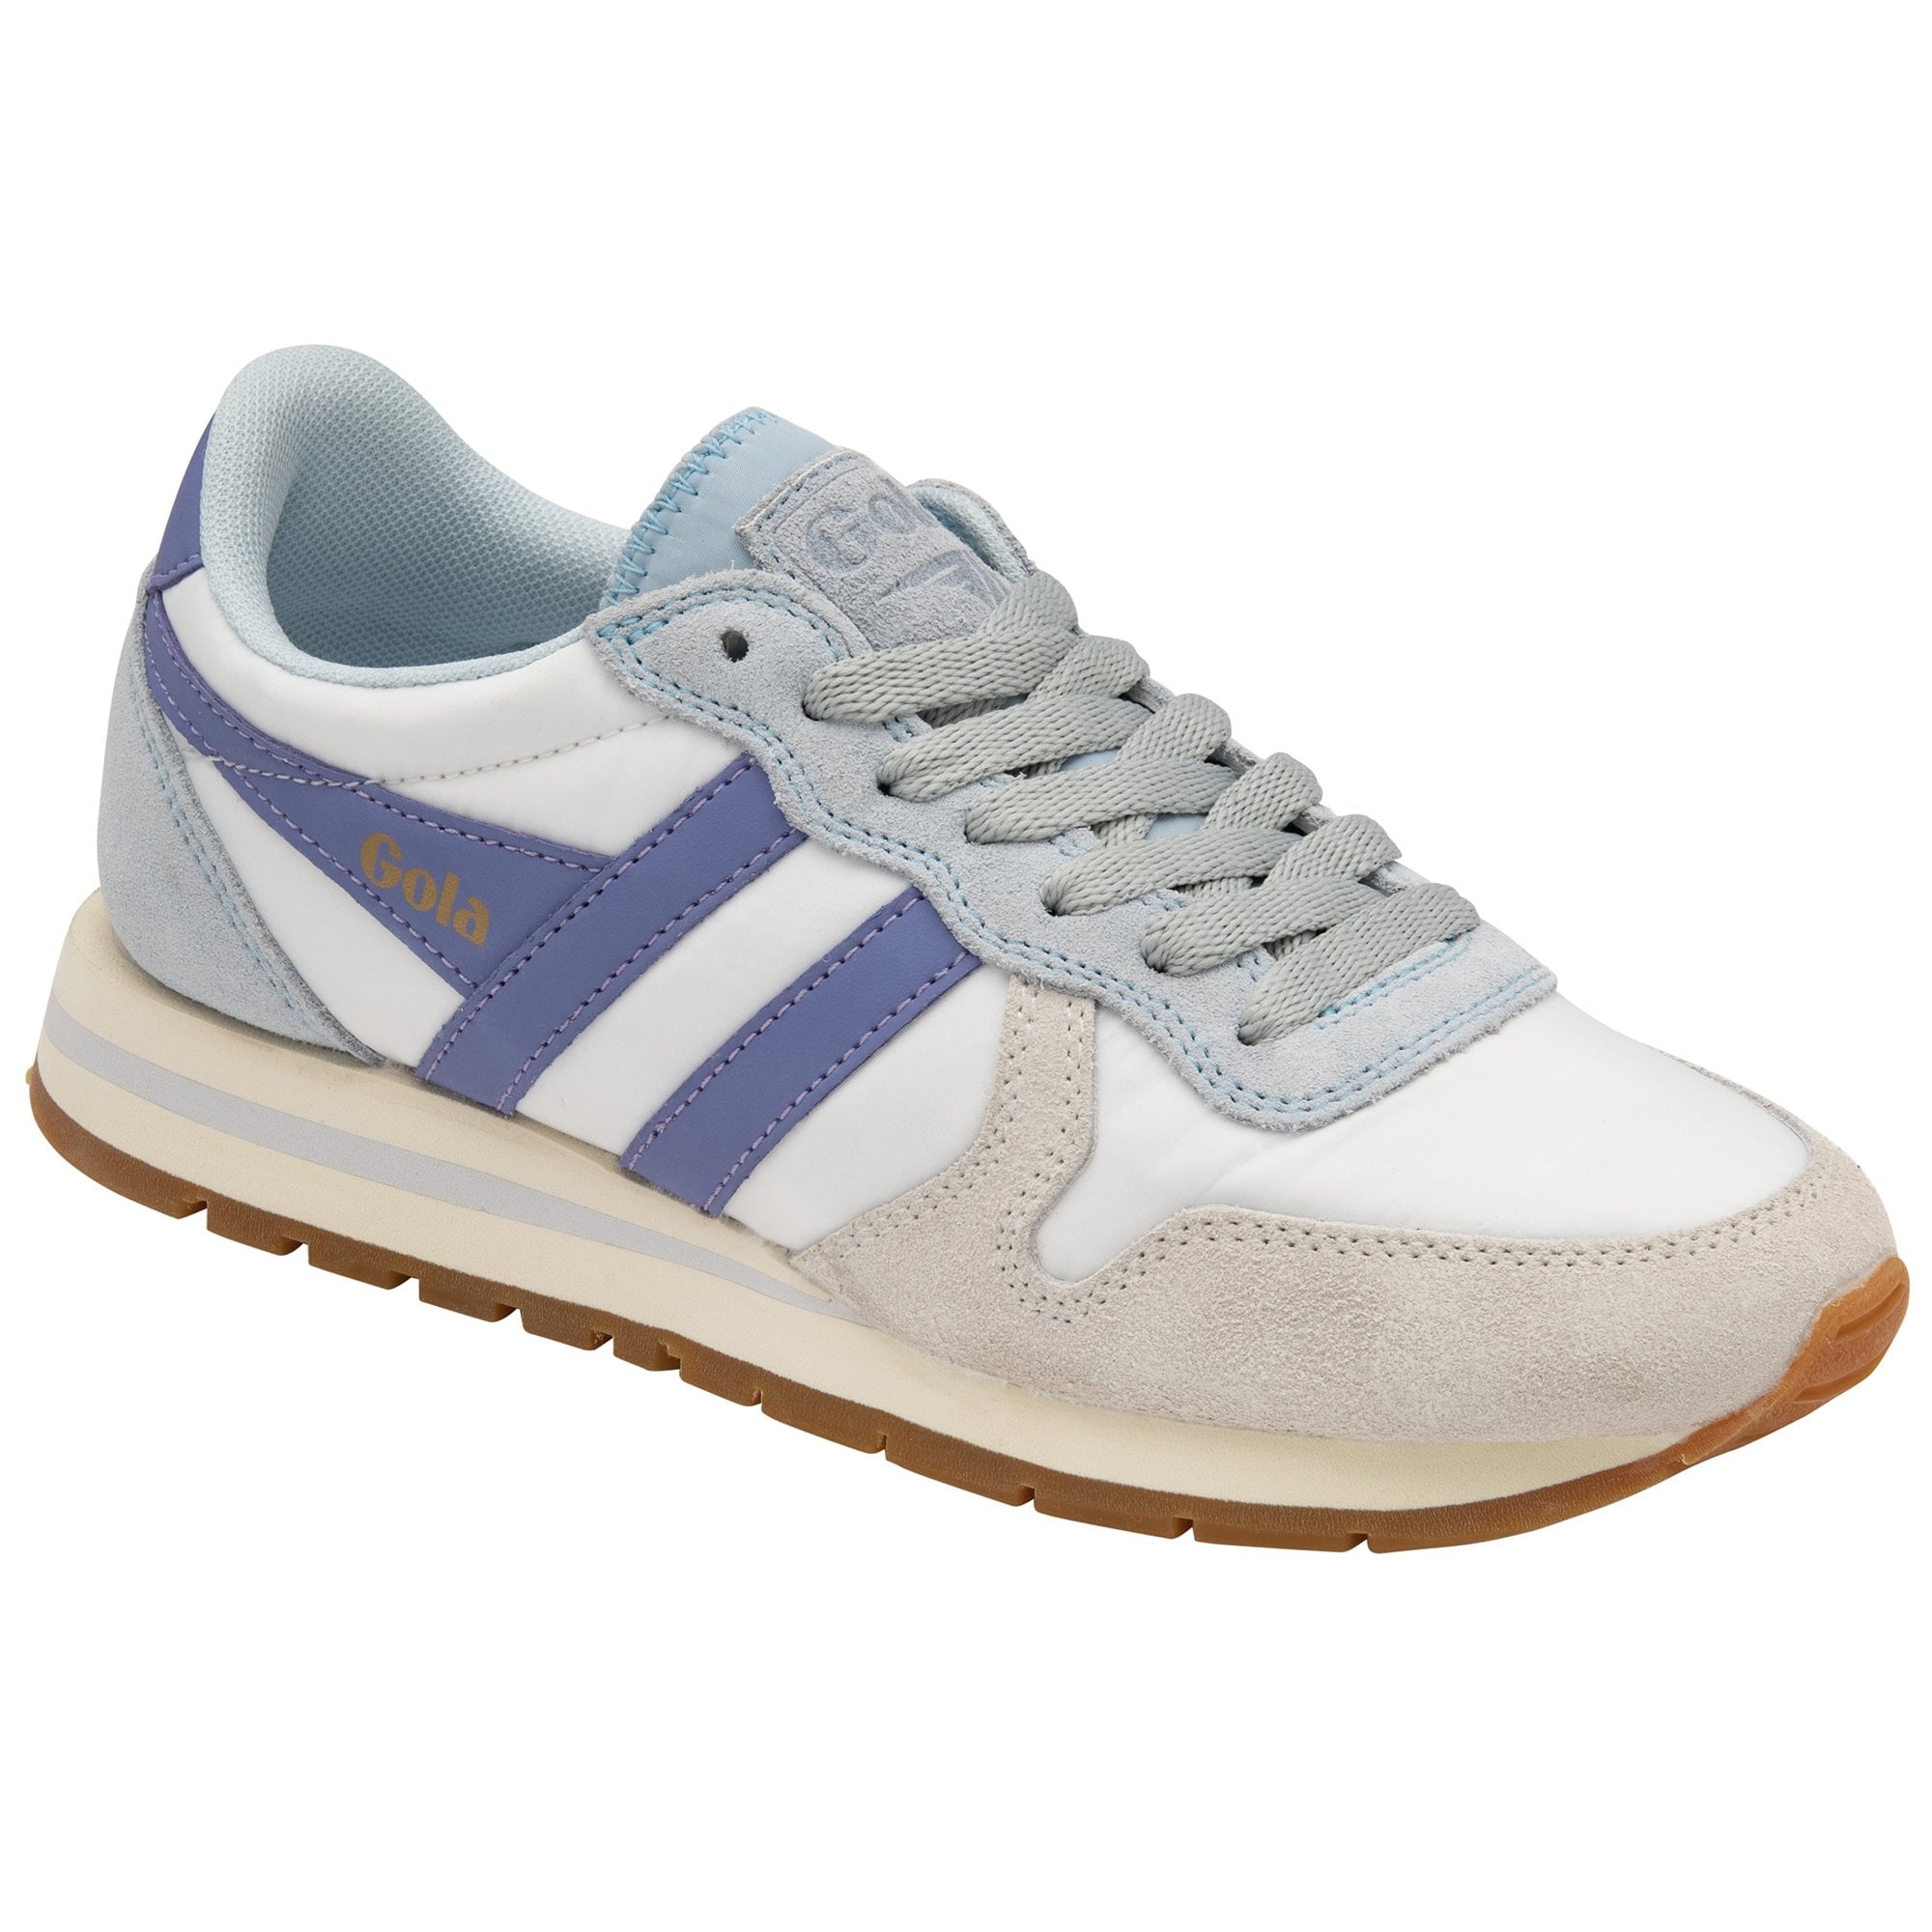 Gola Daytona Chute Ladies Off White, Ice Blue And Lavender Leather & Textile Lace Up Trainers